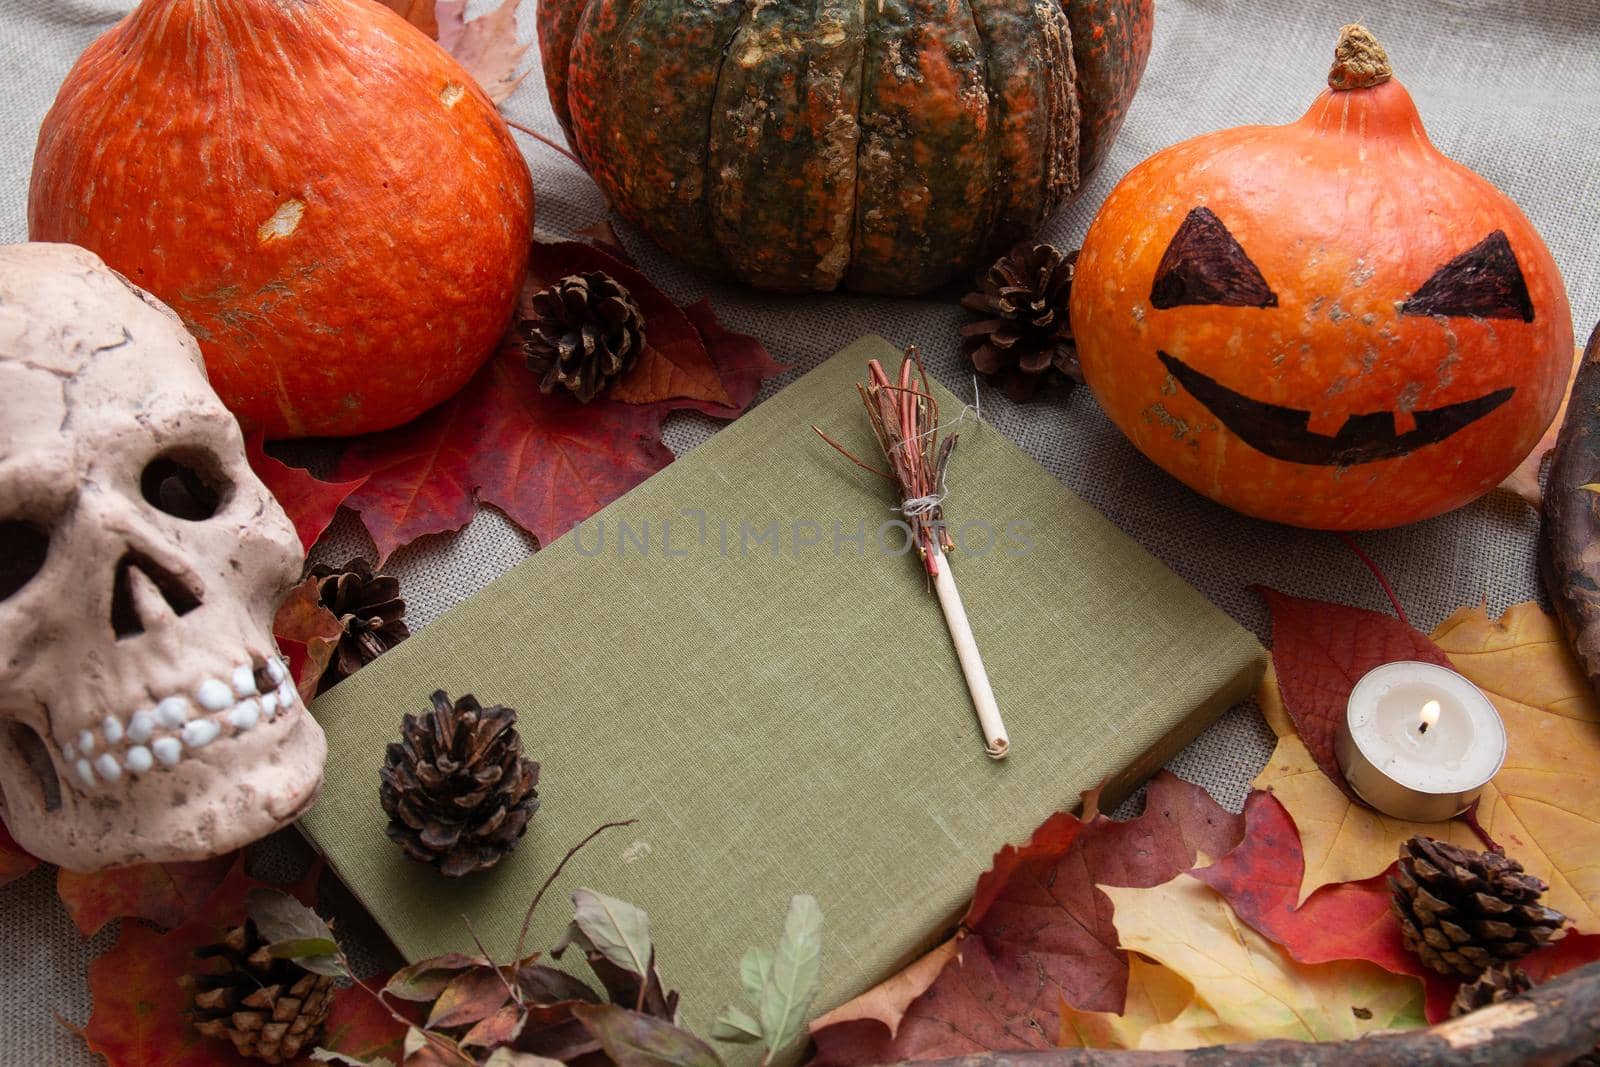 witch's haunted seats on a green paper with a cover made of fabric, pumpkins and a ceramic skull, various autumn natural objects on a linen background, autumn leaves and a candle, halloween background